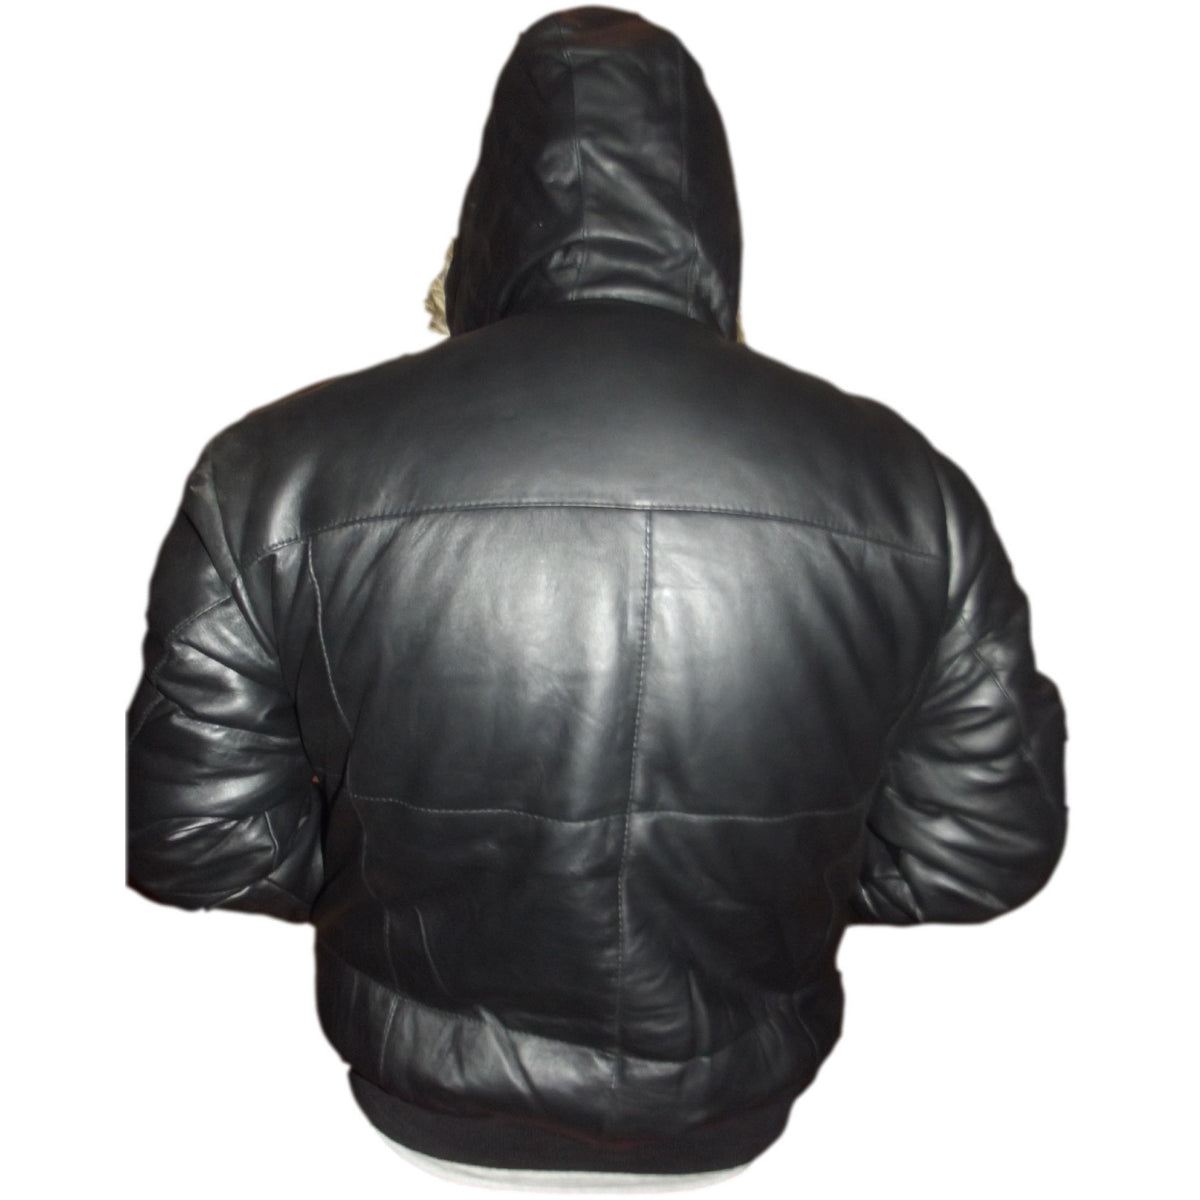 Mens Leather Jacket Black Hooded Puffy Puffer Fur Trim on hood S CLEARANCE SALE